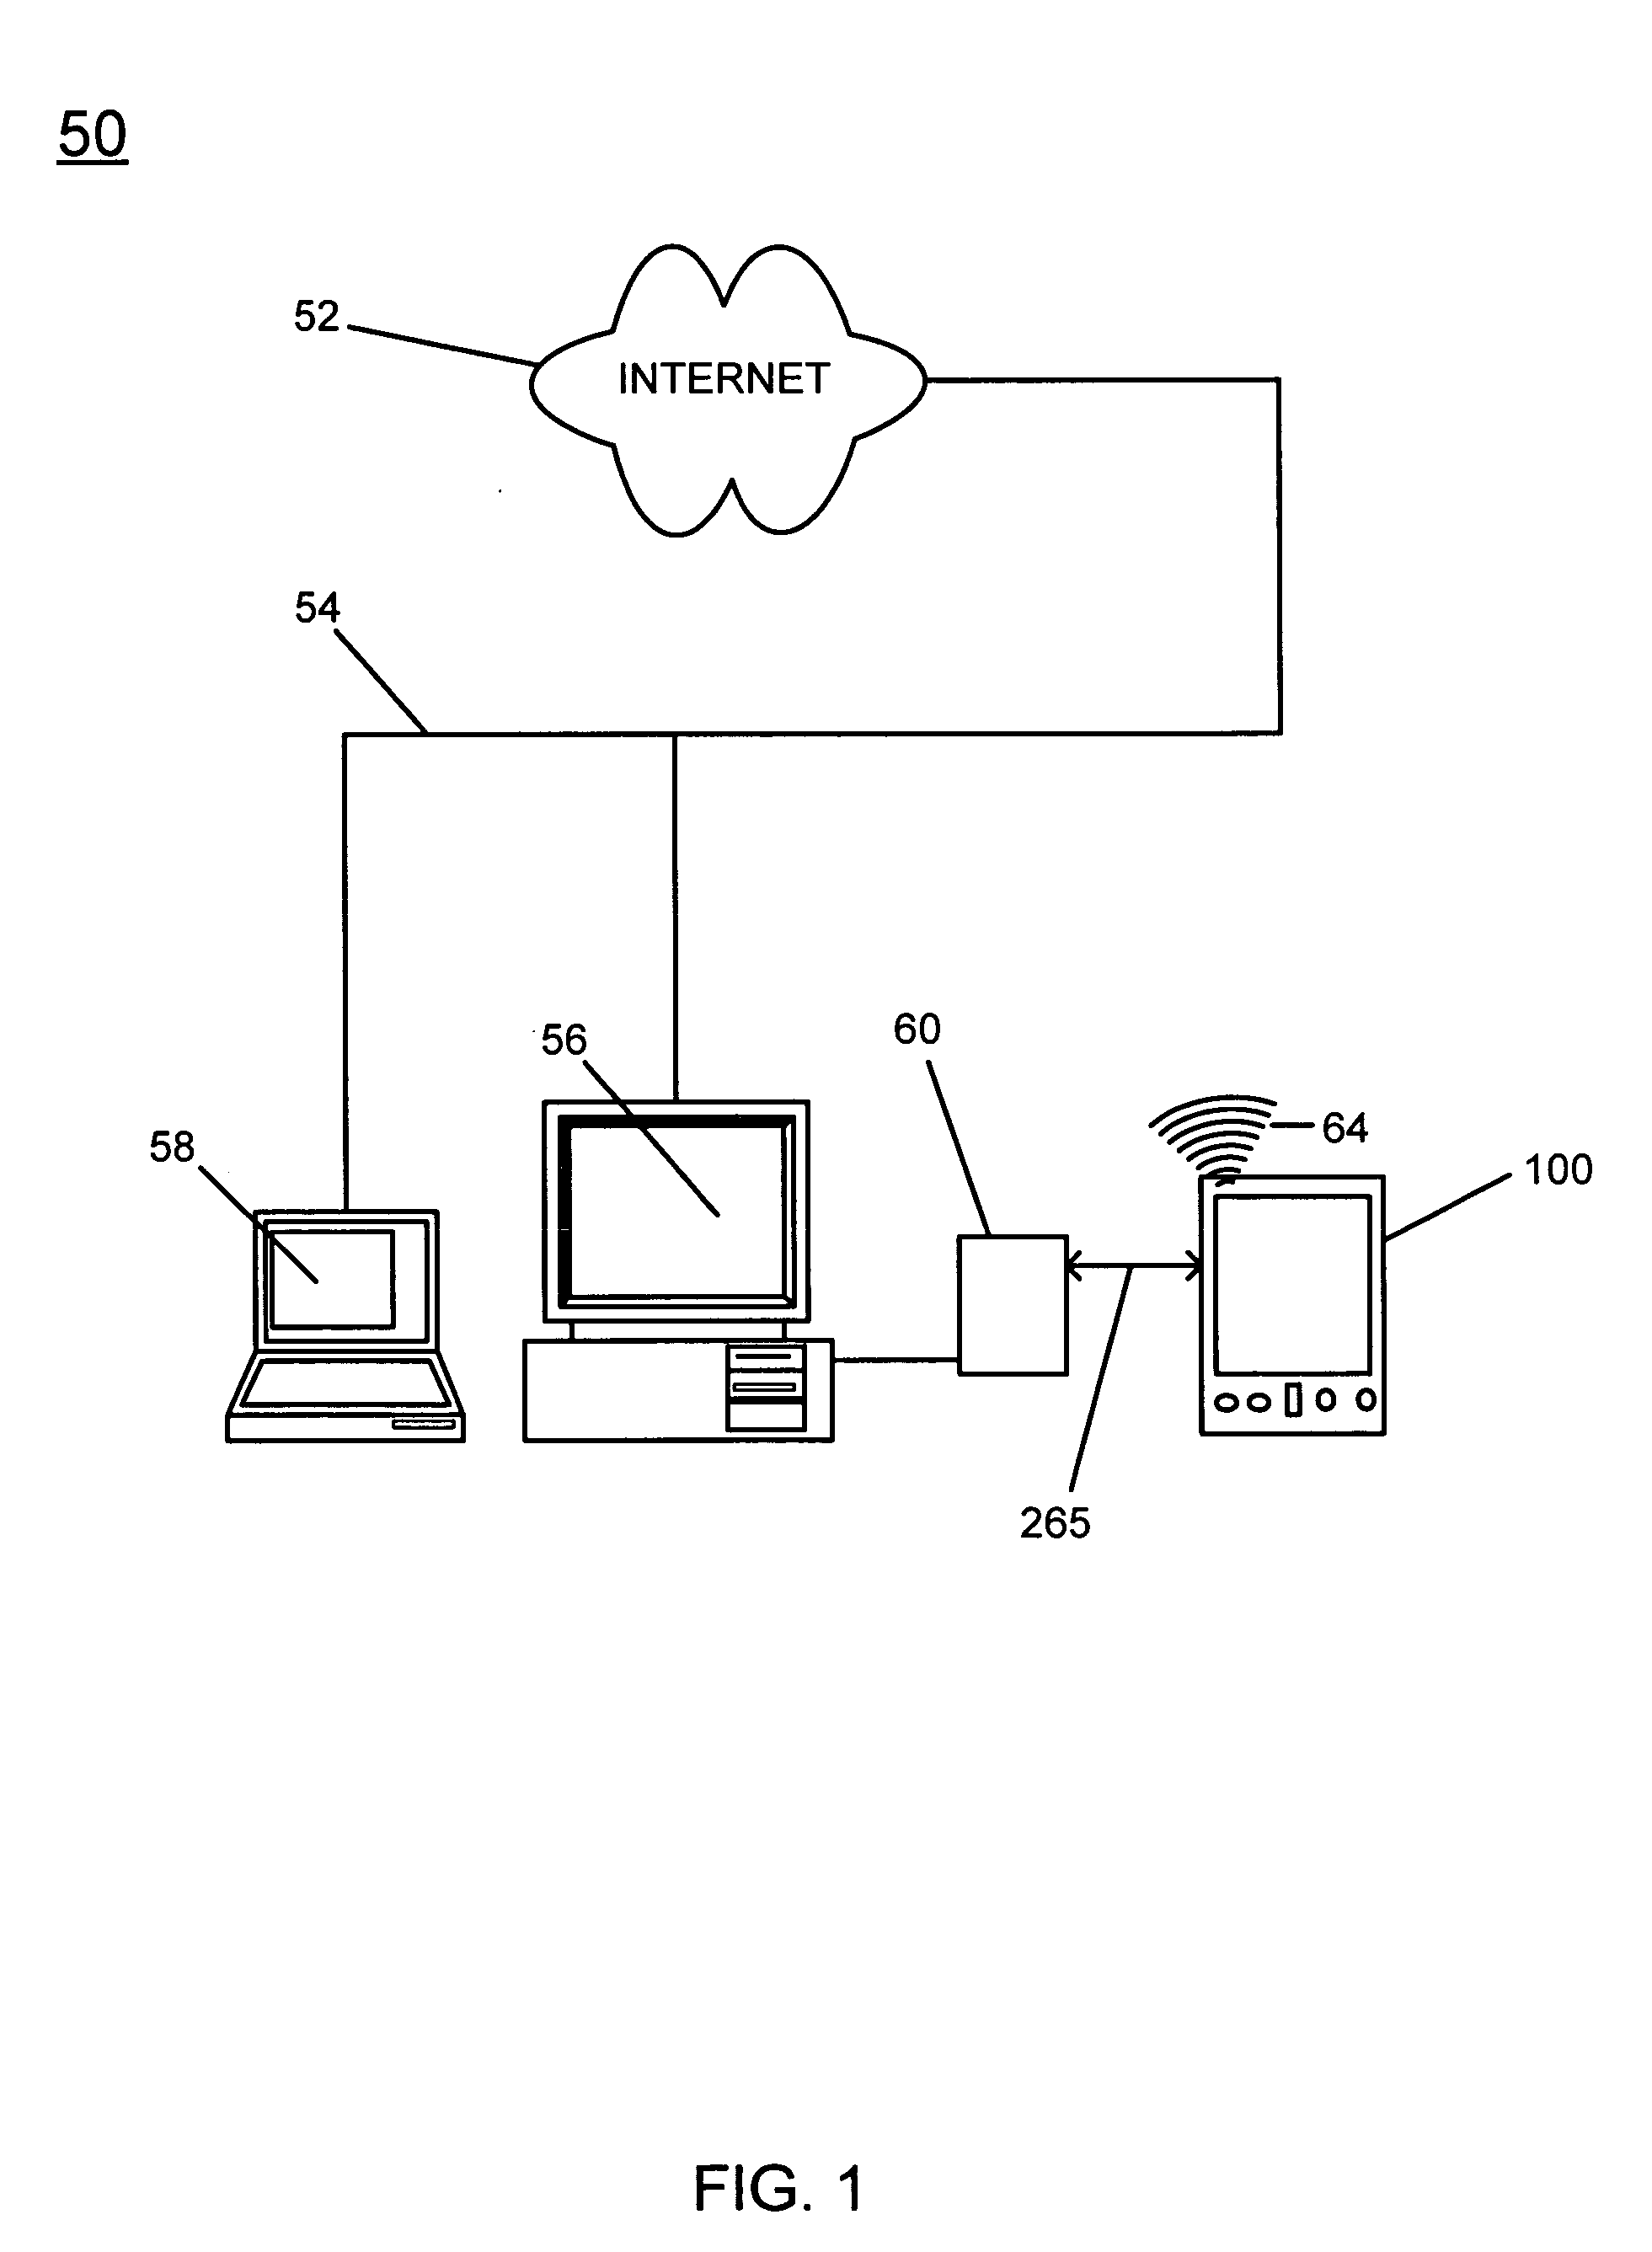 Category specific sort and display instructions for an electronic device